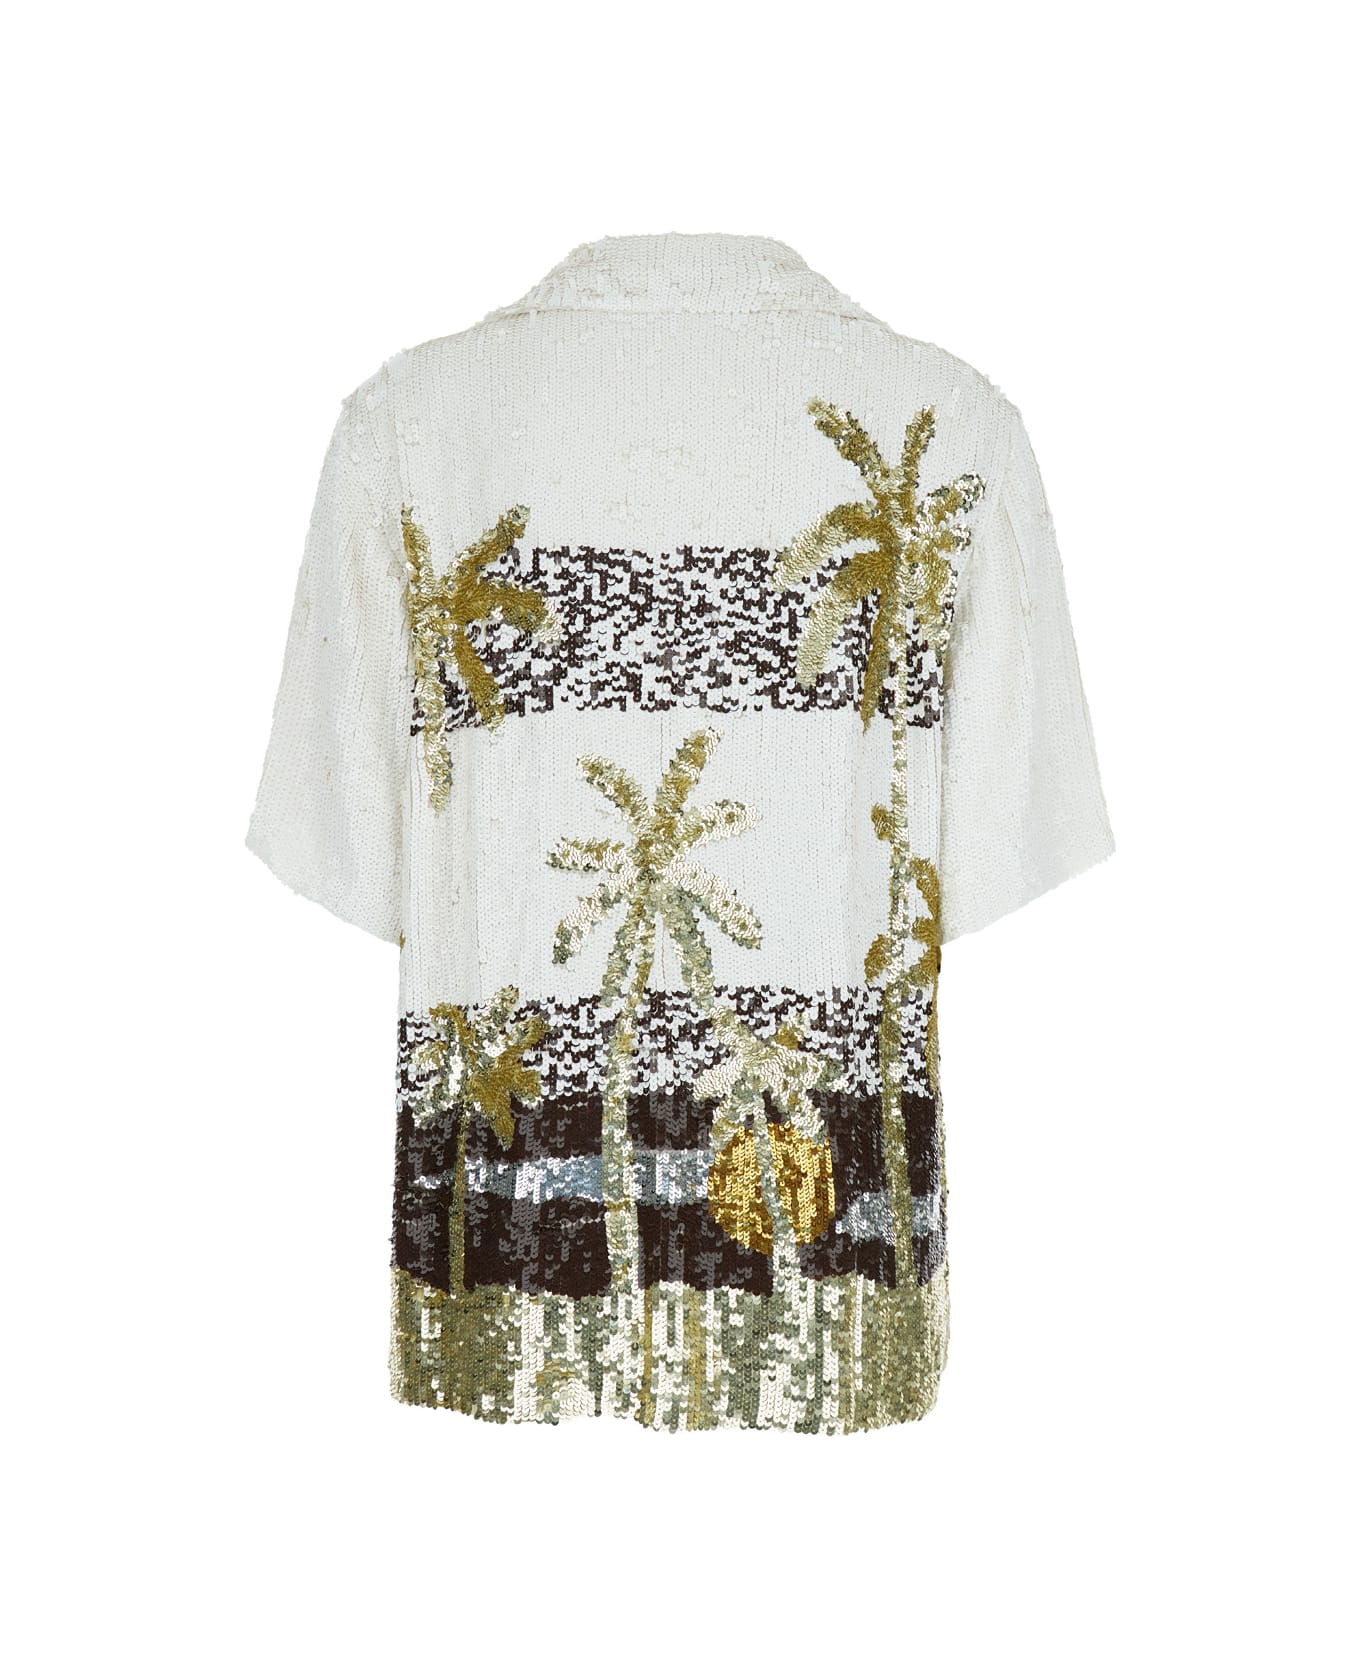 Parosh White Sequins Shirt With Palme Print In Viscose Woman - Multicolor